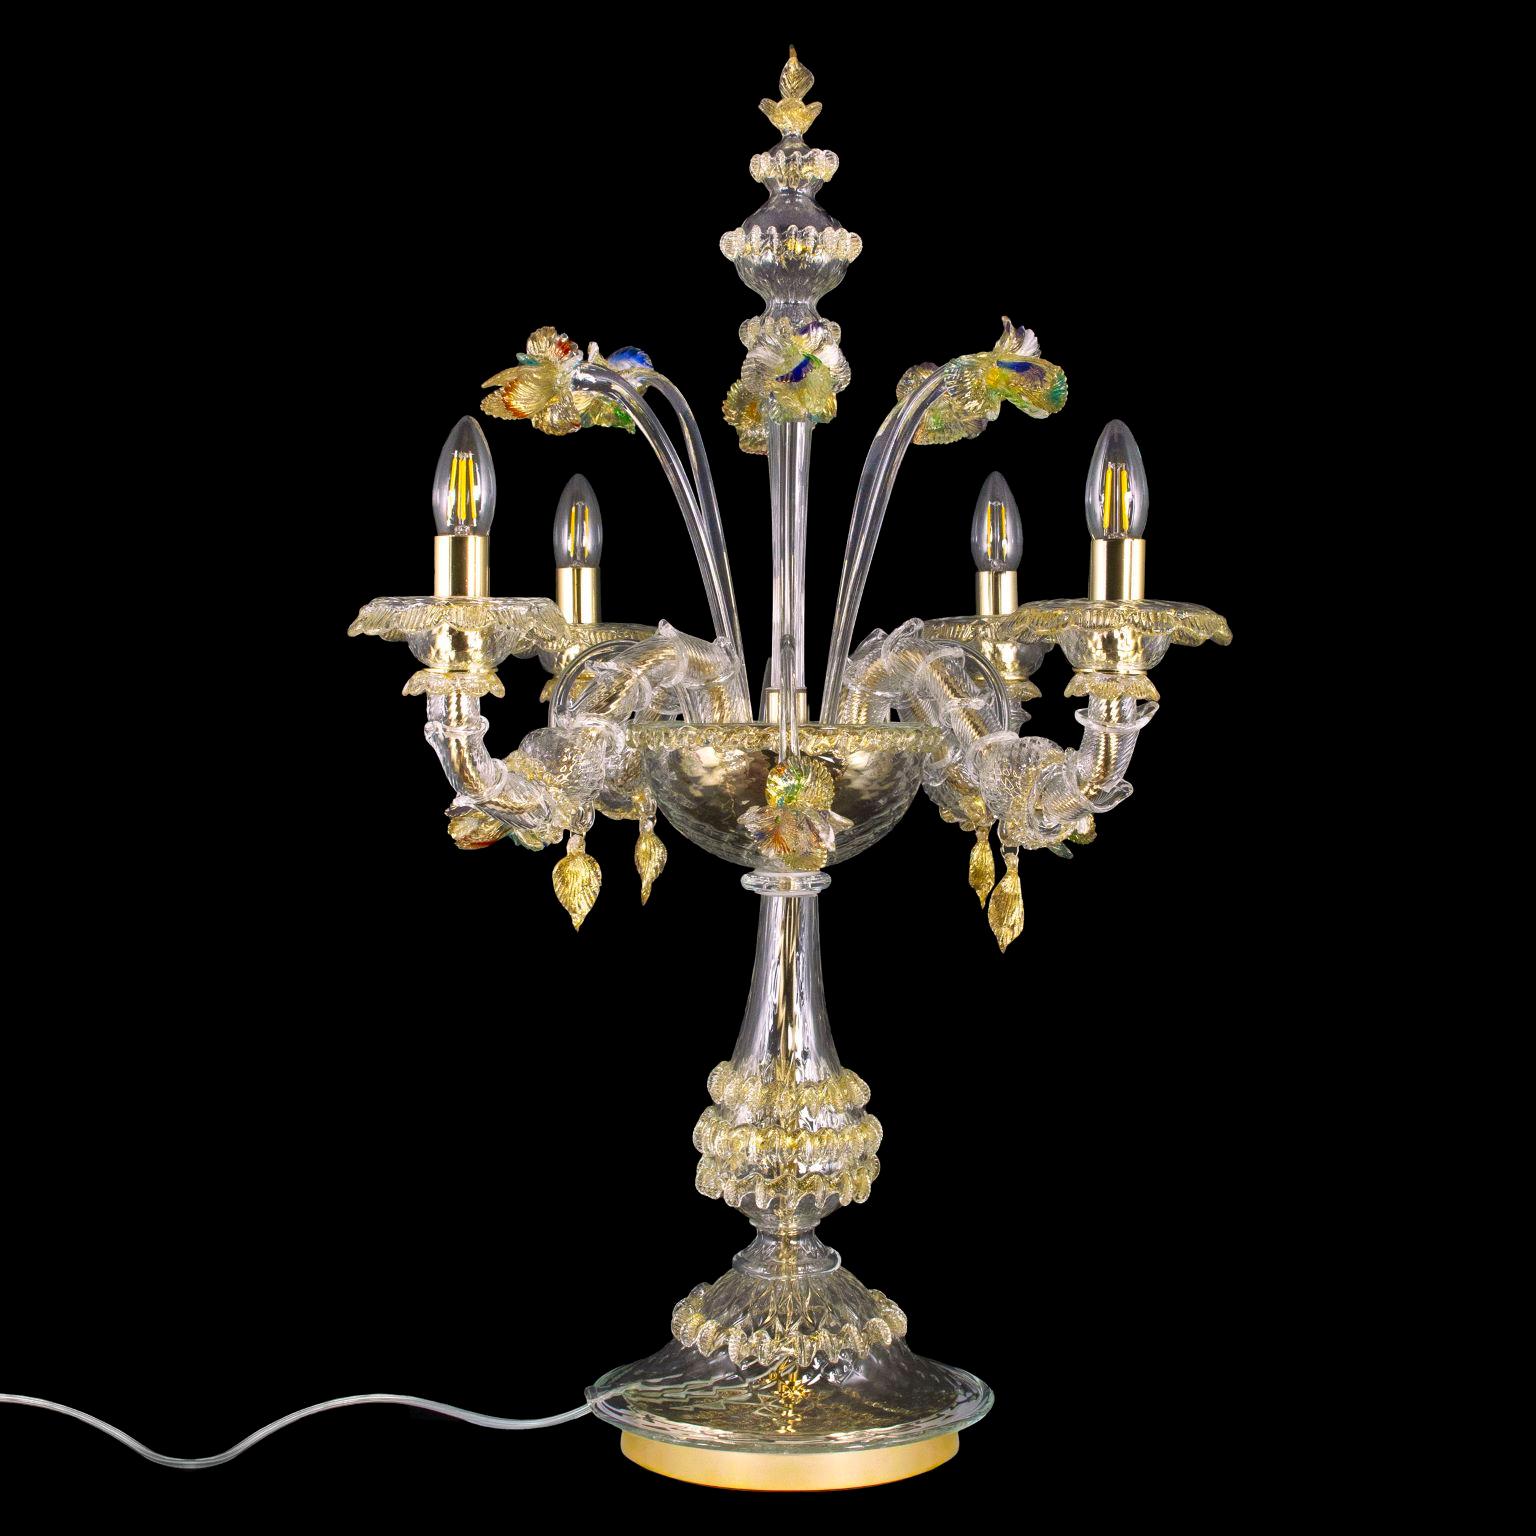 Luxury Rezzonico flambeau lamp 4 arms, clear and gold Murano glass by Multiforme.
The flambeau lamp is a really elegant and luxury table lamp enriched with flowers. The lights are upwards. 
Suitable to enlighten every space and creating a magic